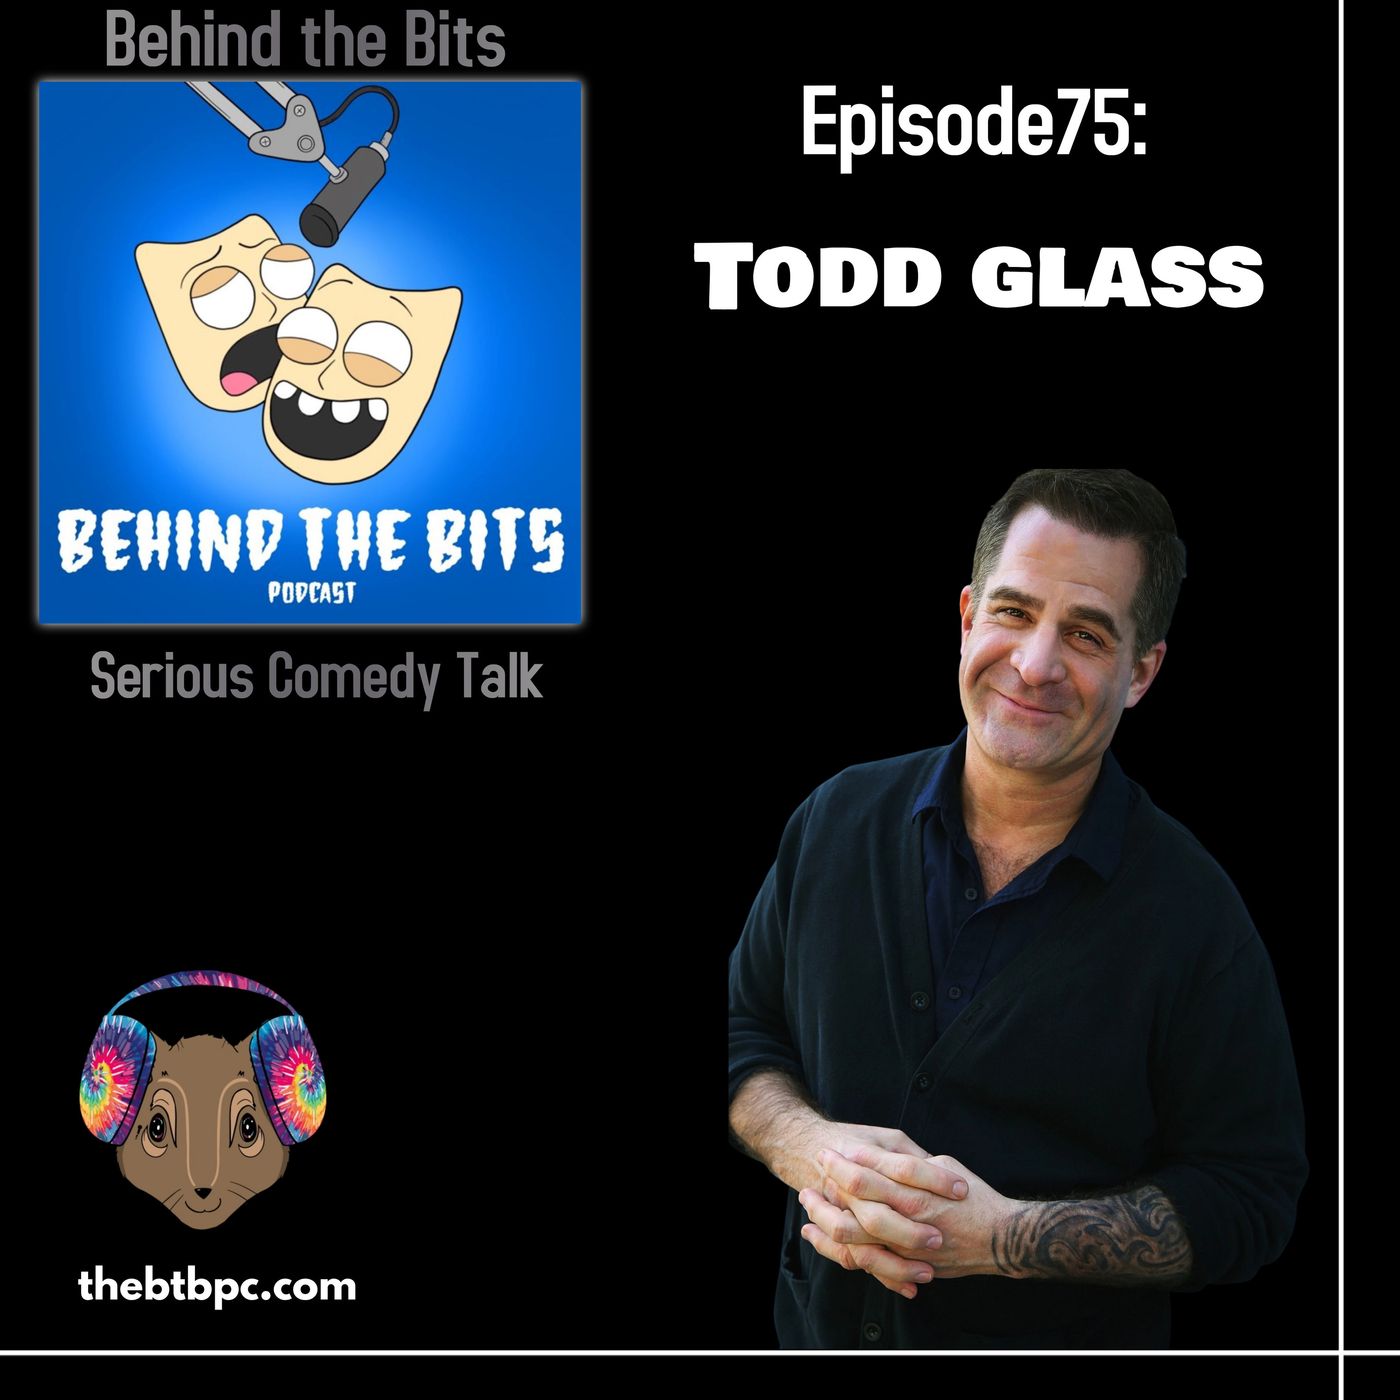 Episode 75: Todd Glass Image